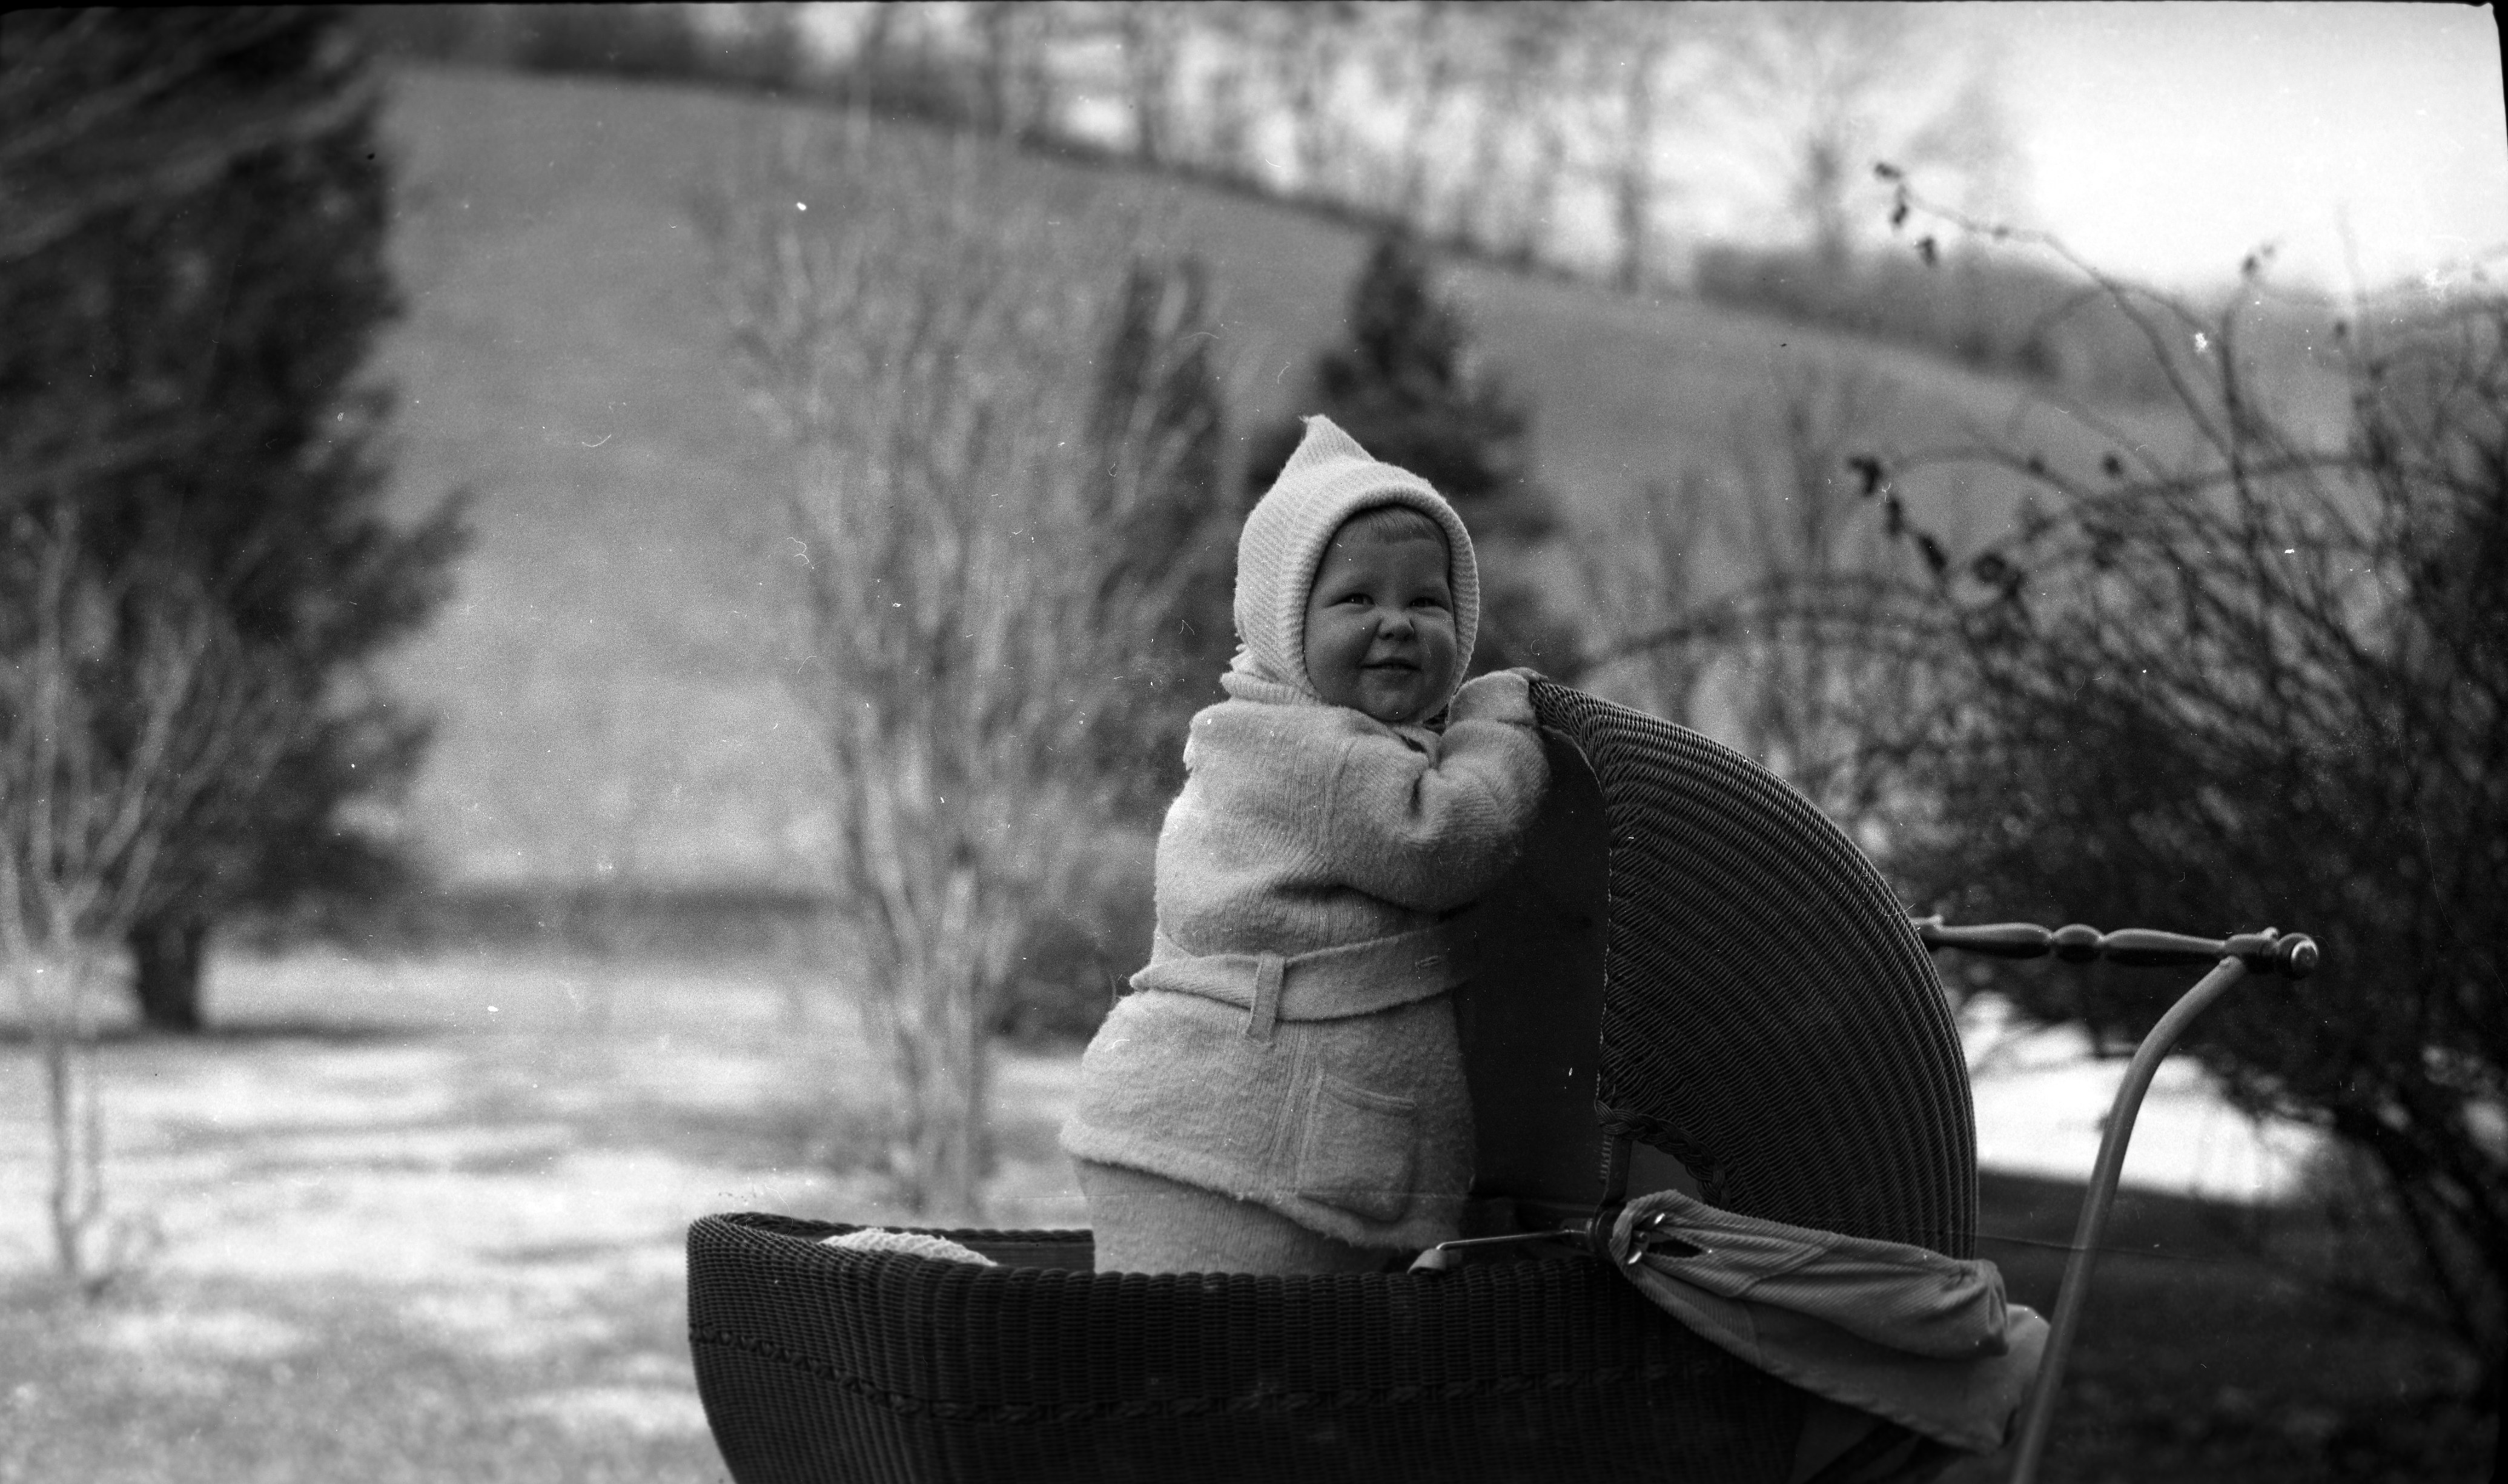 Black and white image of a baby bundled in warm clothing standing in his carriage